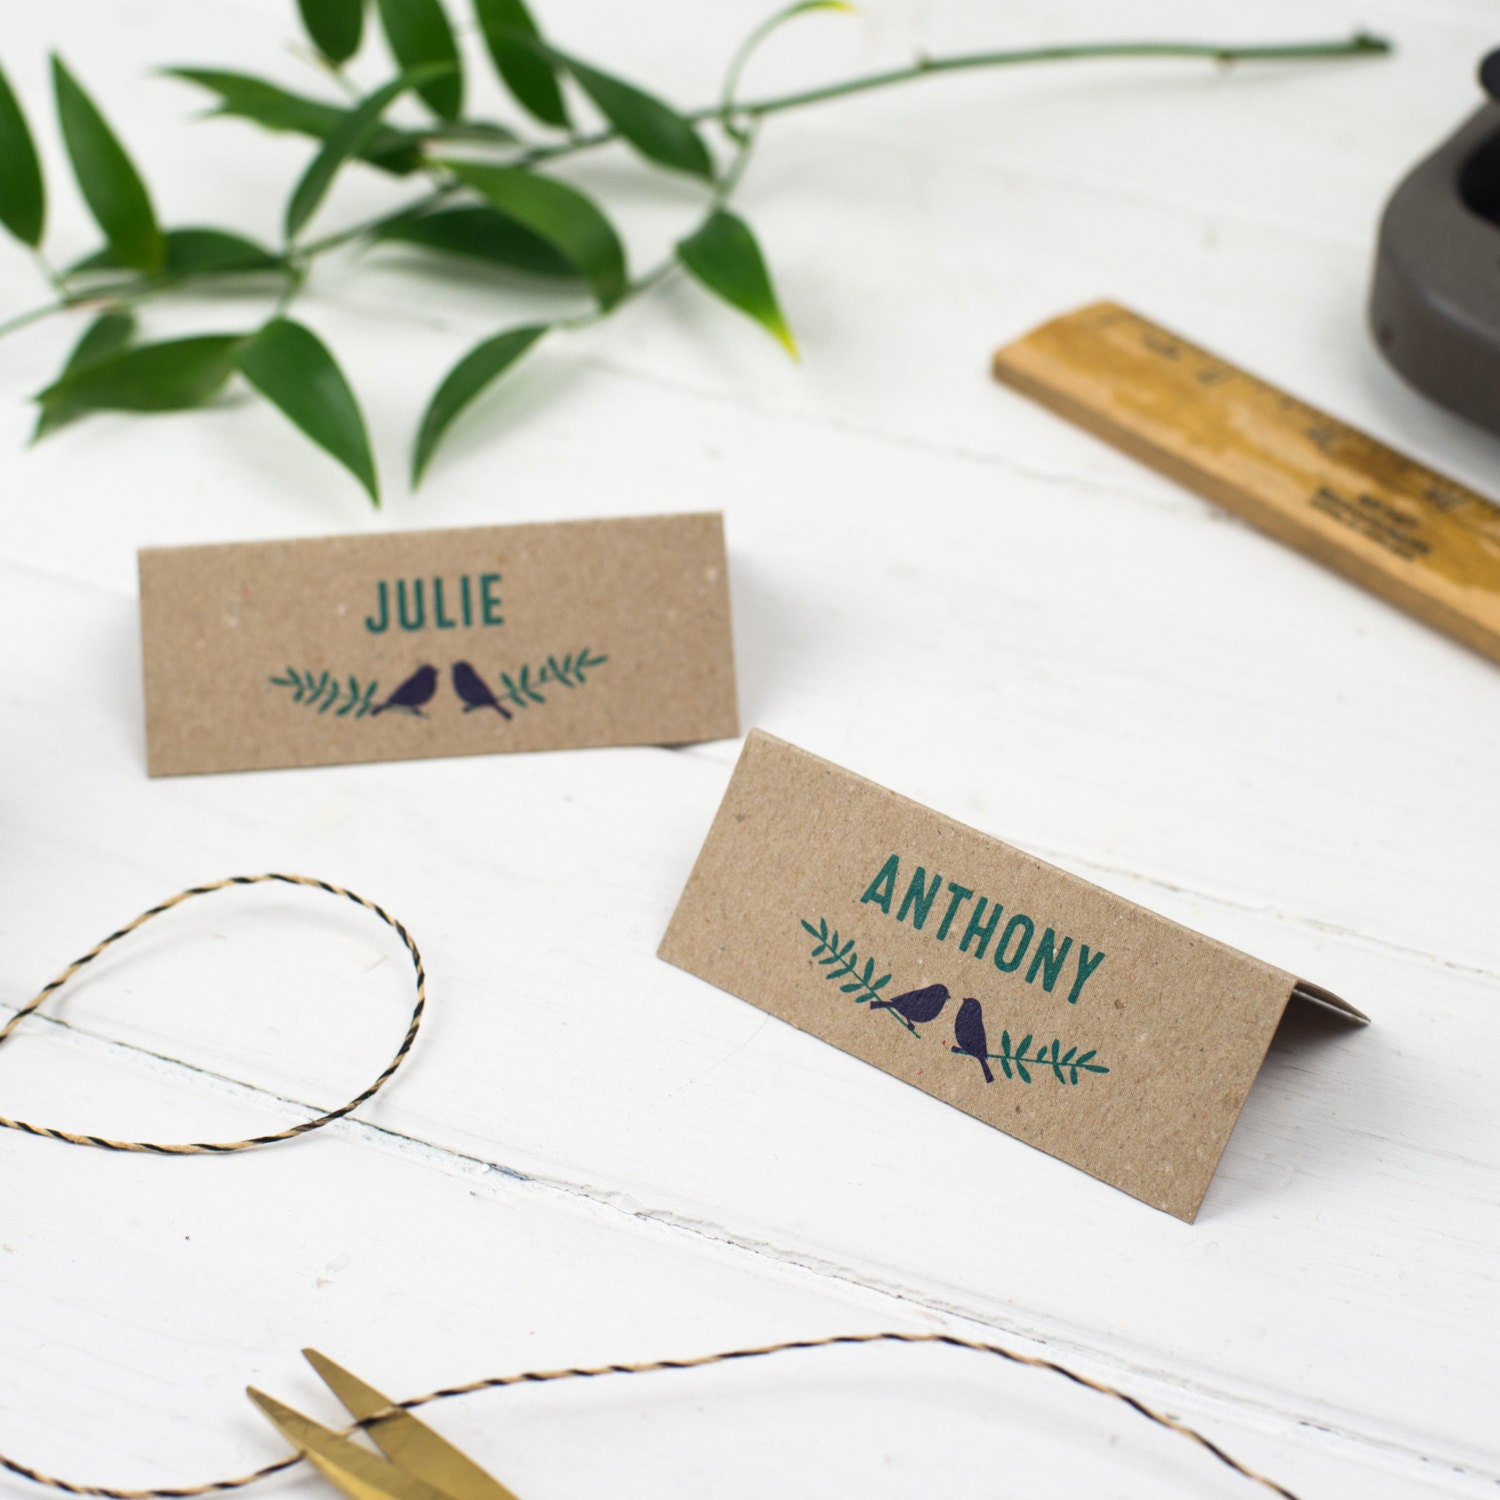 Wedding Place Cards, Woodland Names, Rustic Table Love Bird Name Tags, Garden Party, Retro Natural Kraft Cards